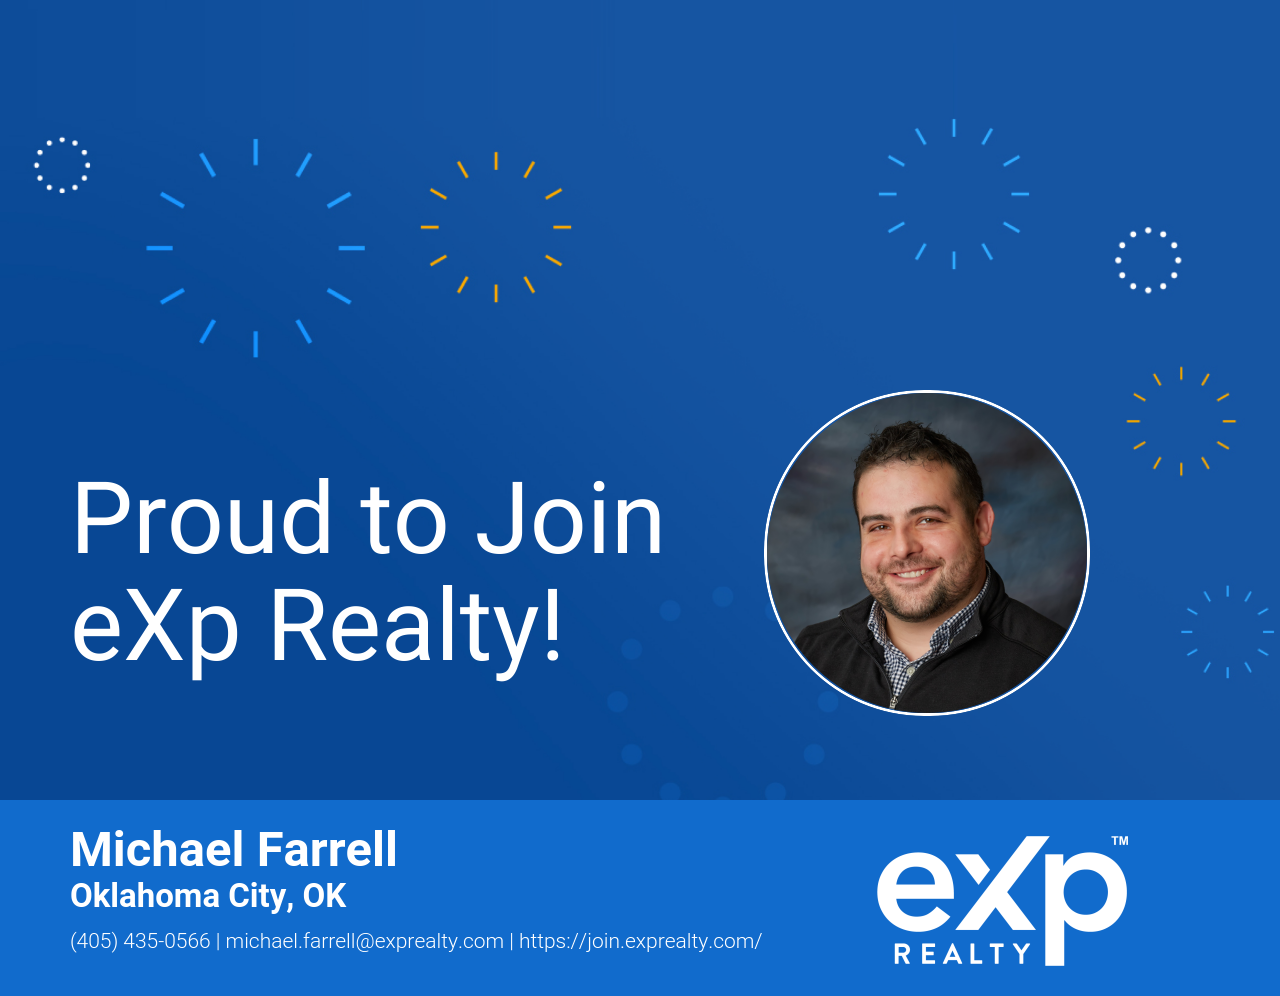 Michael Farrell Joined eXp Realty!